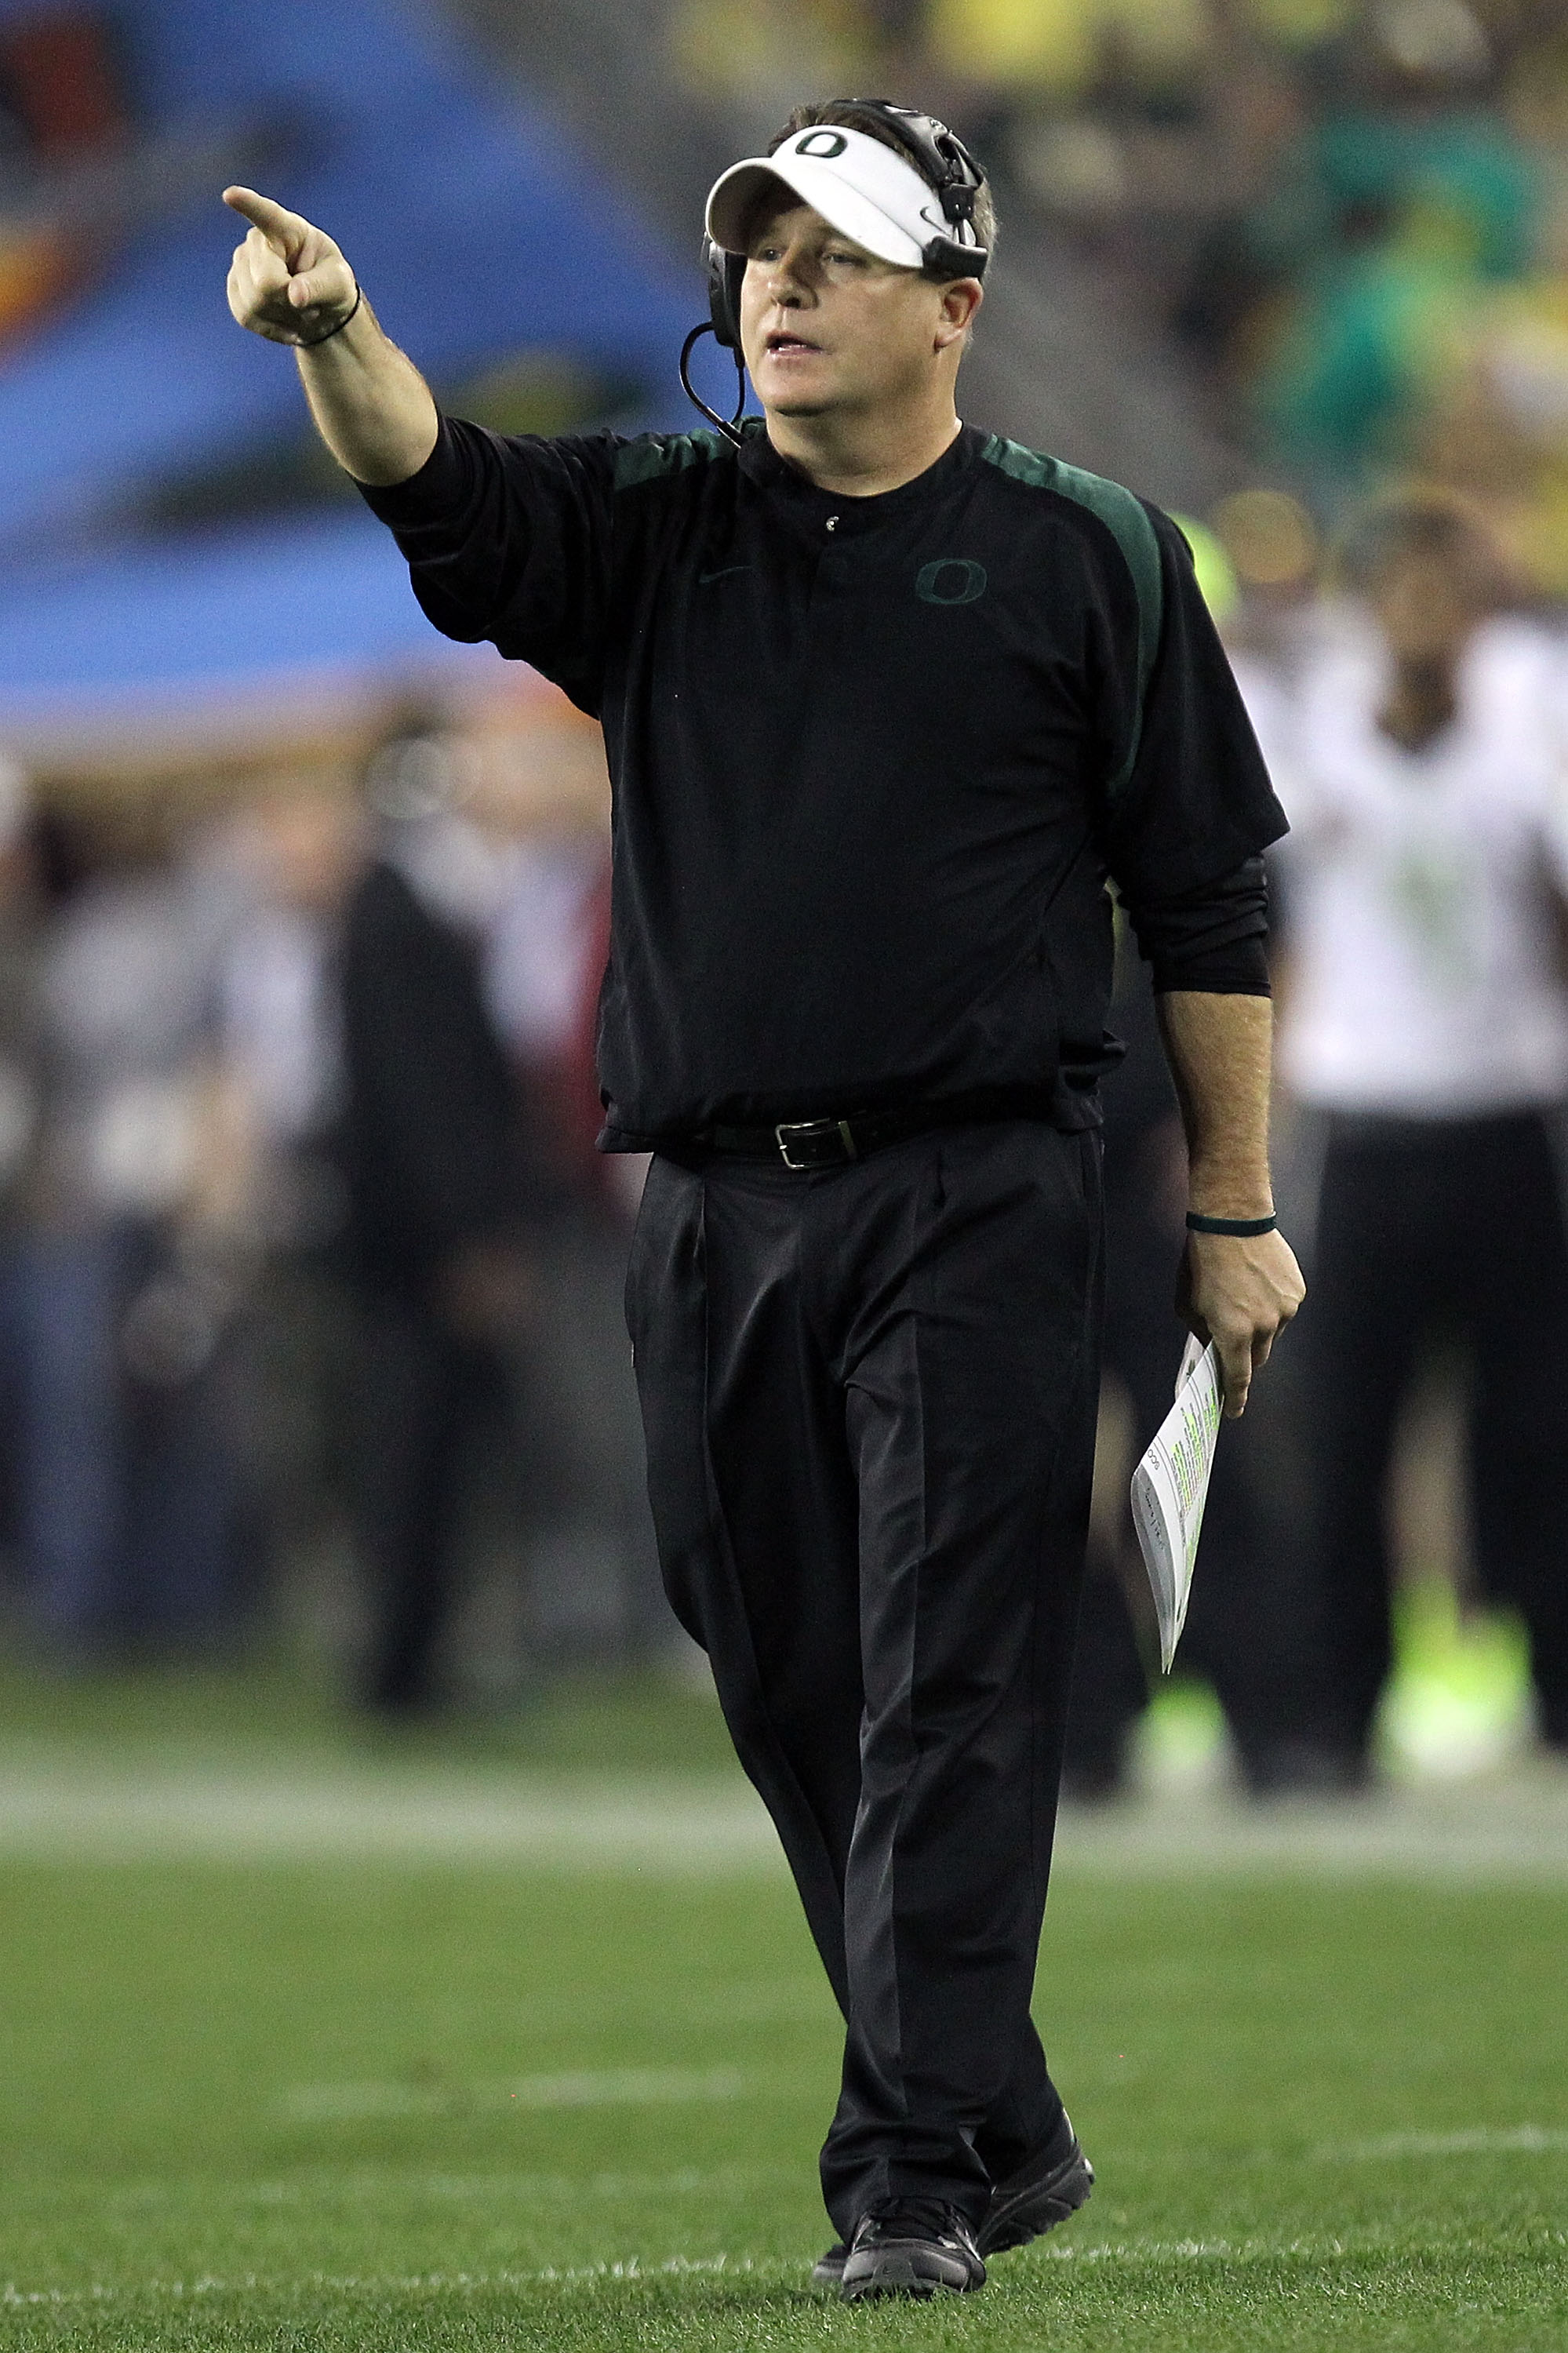 GLENDALE, AZ - JANUARY 10:  Head coach Chip Kelly of the Oregon Ducks calls a play against the Auburn Tigers in the Tostitos BCS National Championship Game at University of Phoenix Stadium on January 10, 2011 in Glendale, Arizona.  (Photo by Ronald Martin